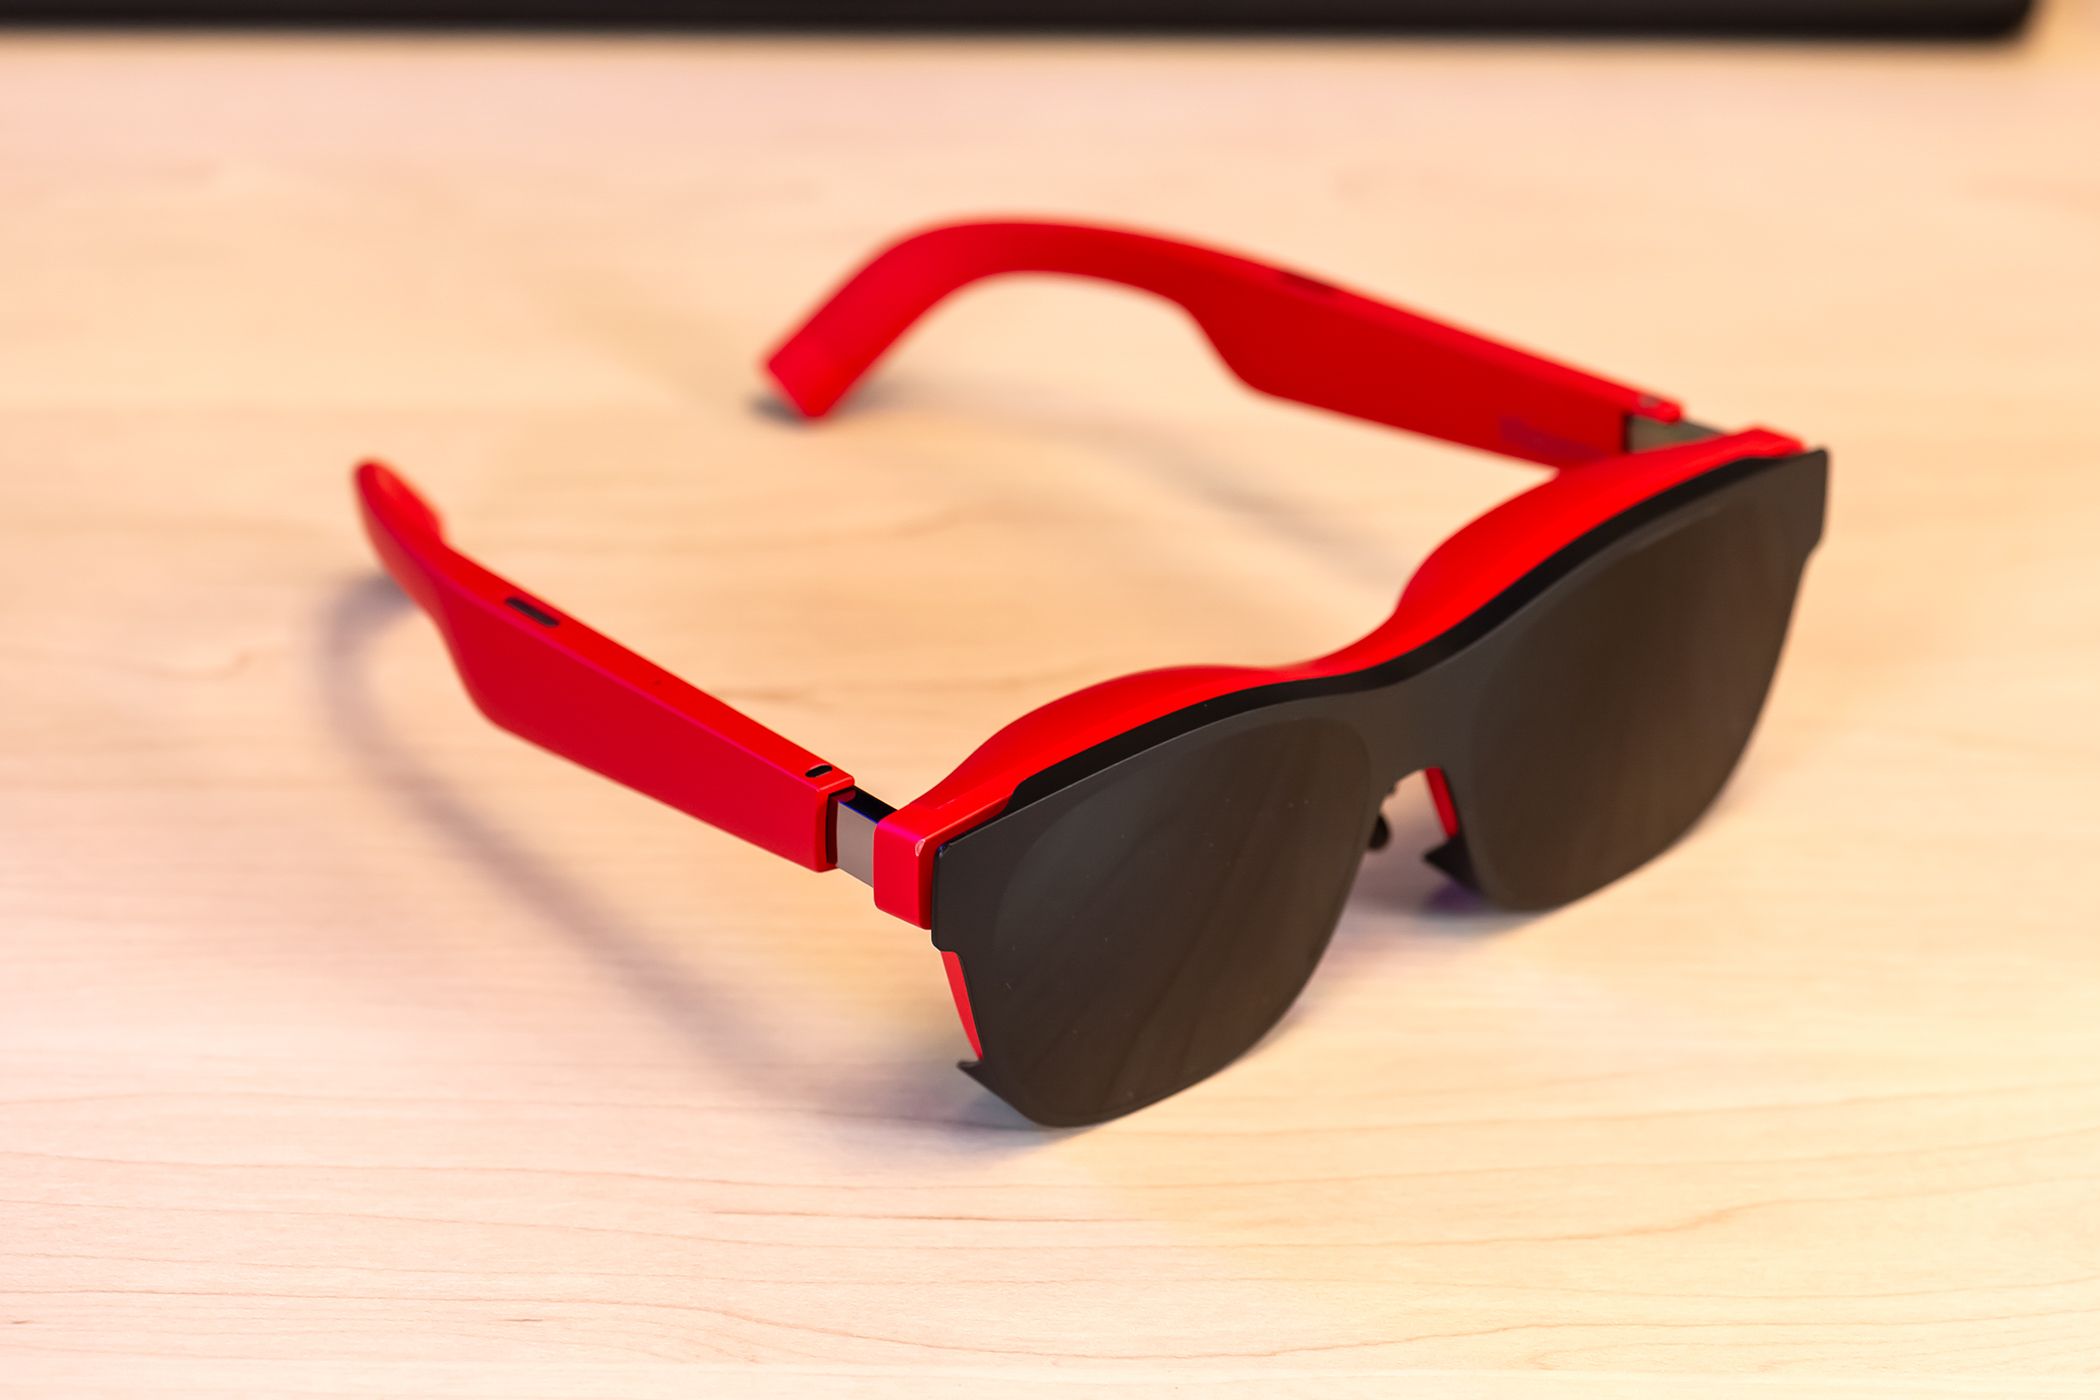 Angled view of the XREAL Air 2 glasses with the light dimmer on